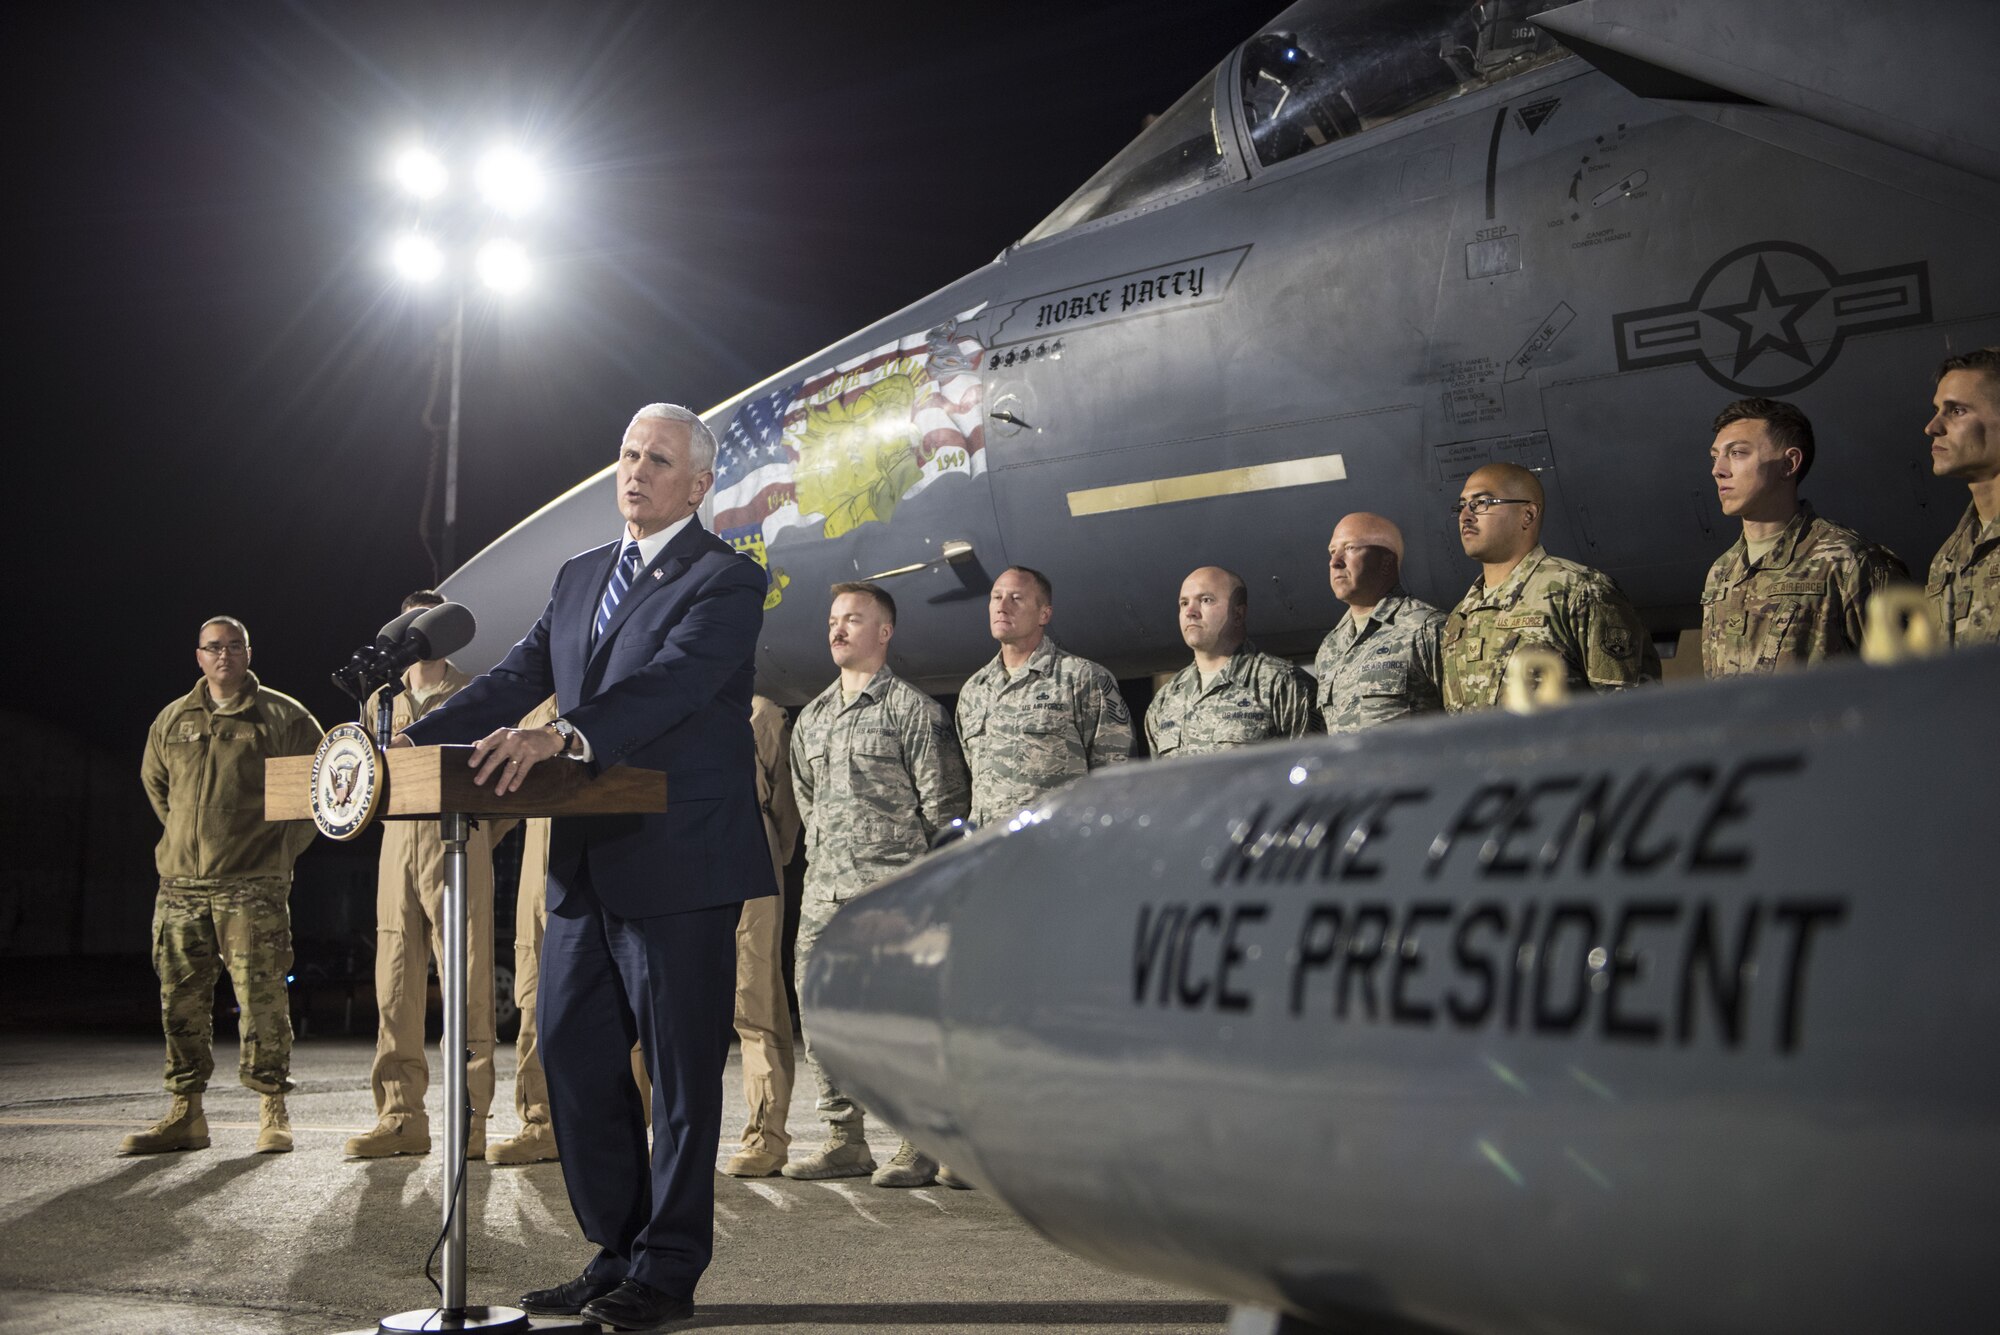 U.S. Vice President Mike Pence addresses the media during a visit at an undisclosed military installation in Southwest Asia, January 21, 2018. Just prior to fielding questions from the press, Pence visited with and recognized members of the 332d Expeditionary Aircraft Maintenance Squadron. (U.S. Air Force photo by Staff Sgt. Joshua Kleinholz)